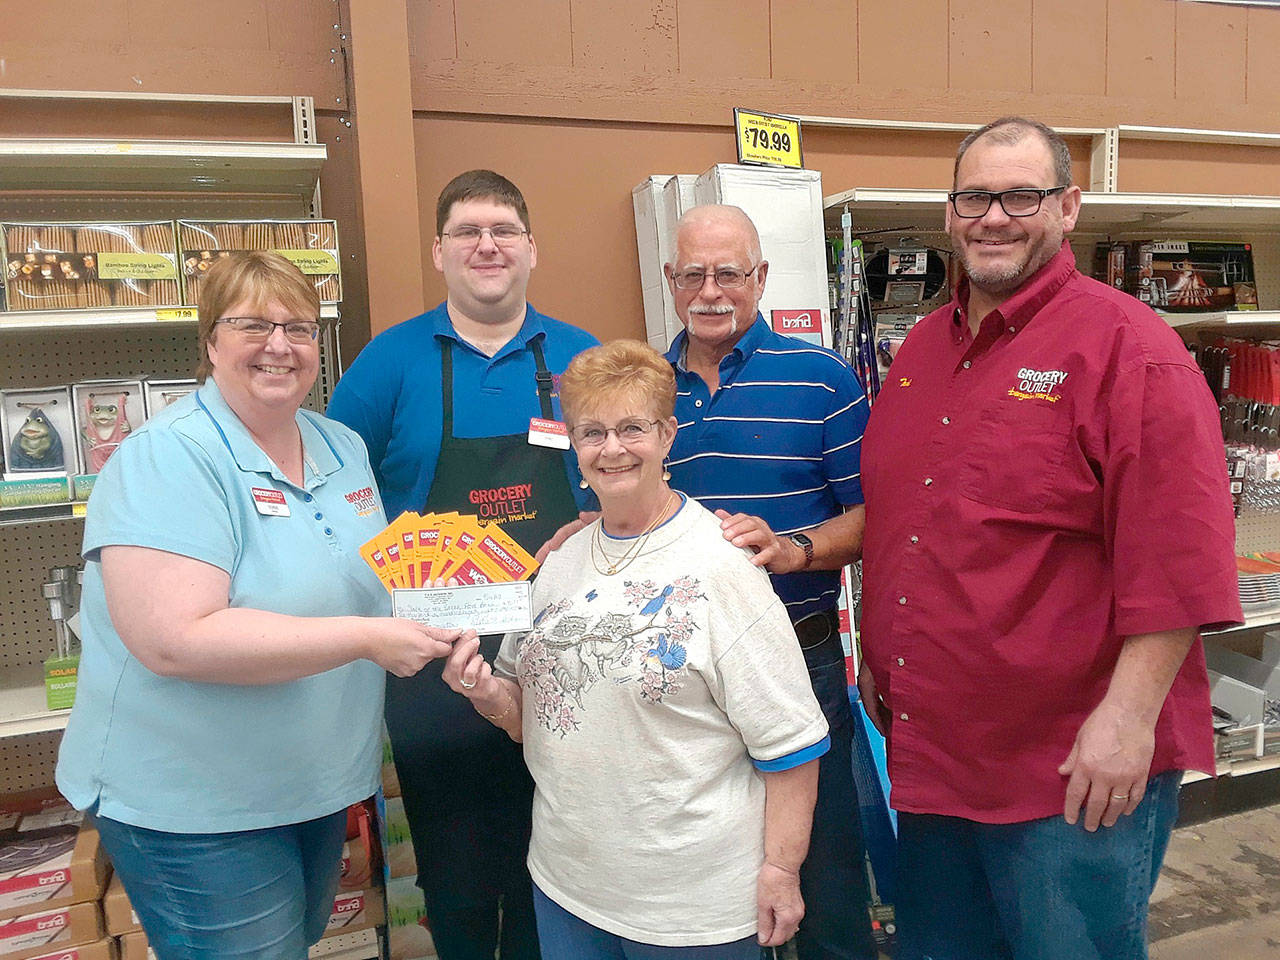 Grocery Outlet recently donated to Salt of the Earth Food Bank and Soup Kitchen. Pictured from left are grocery owner Debbie Jackson, employee Eric Foreman, food bank representatives Sandra and David Richards, and grocery owner Todd Jackson.